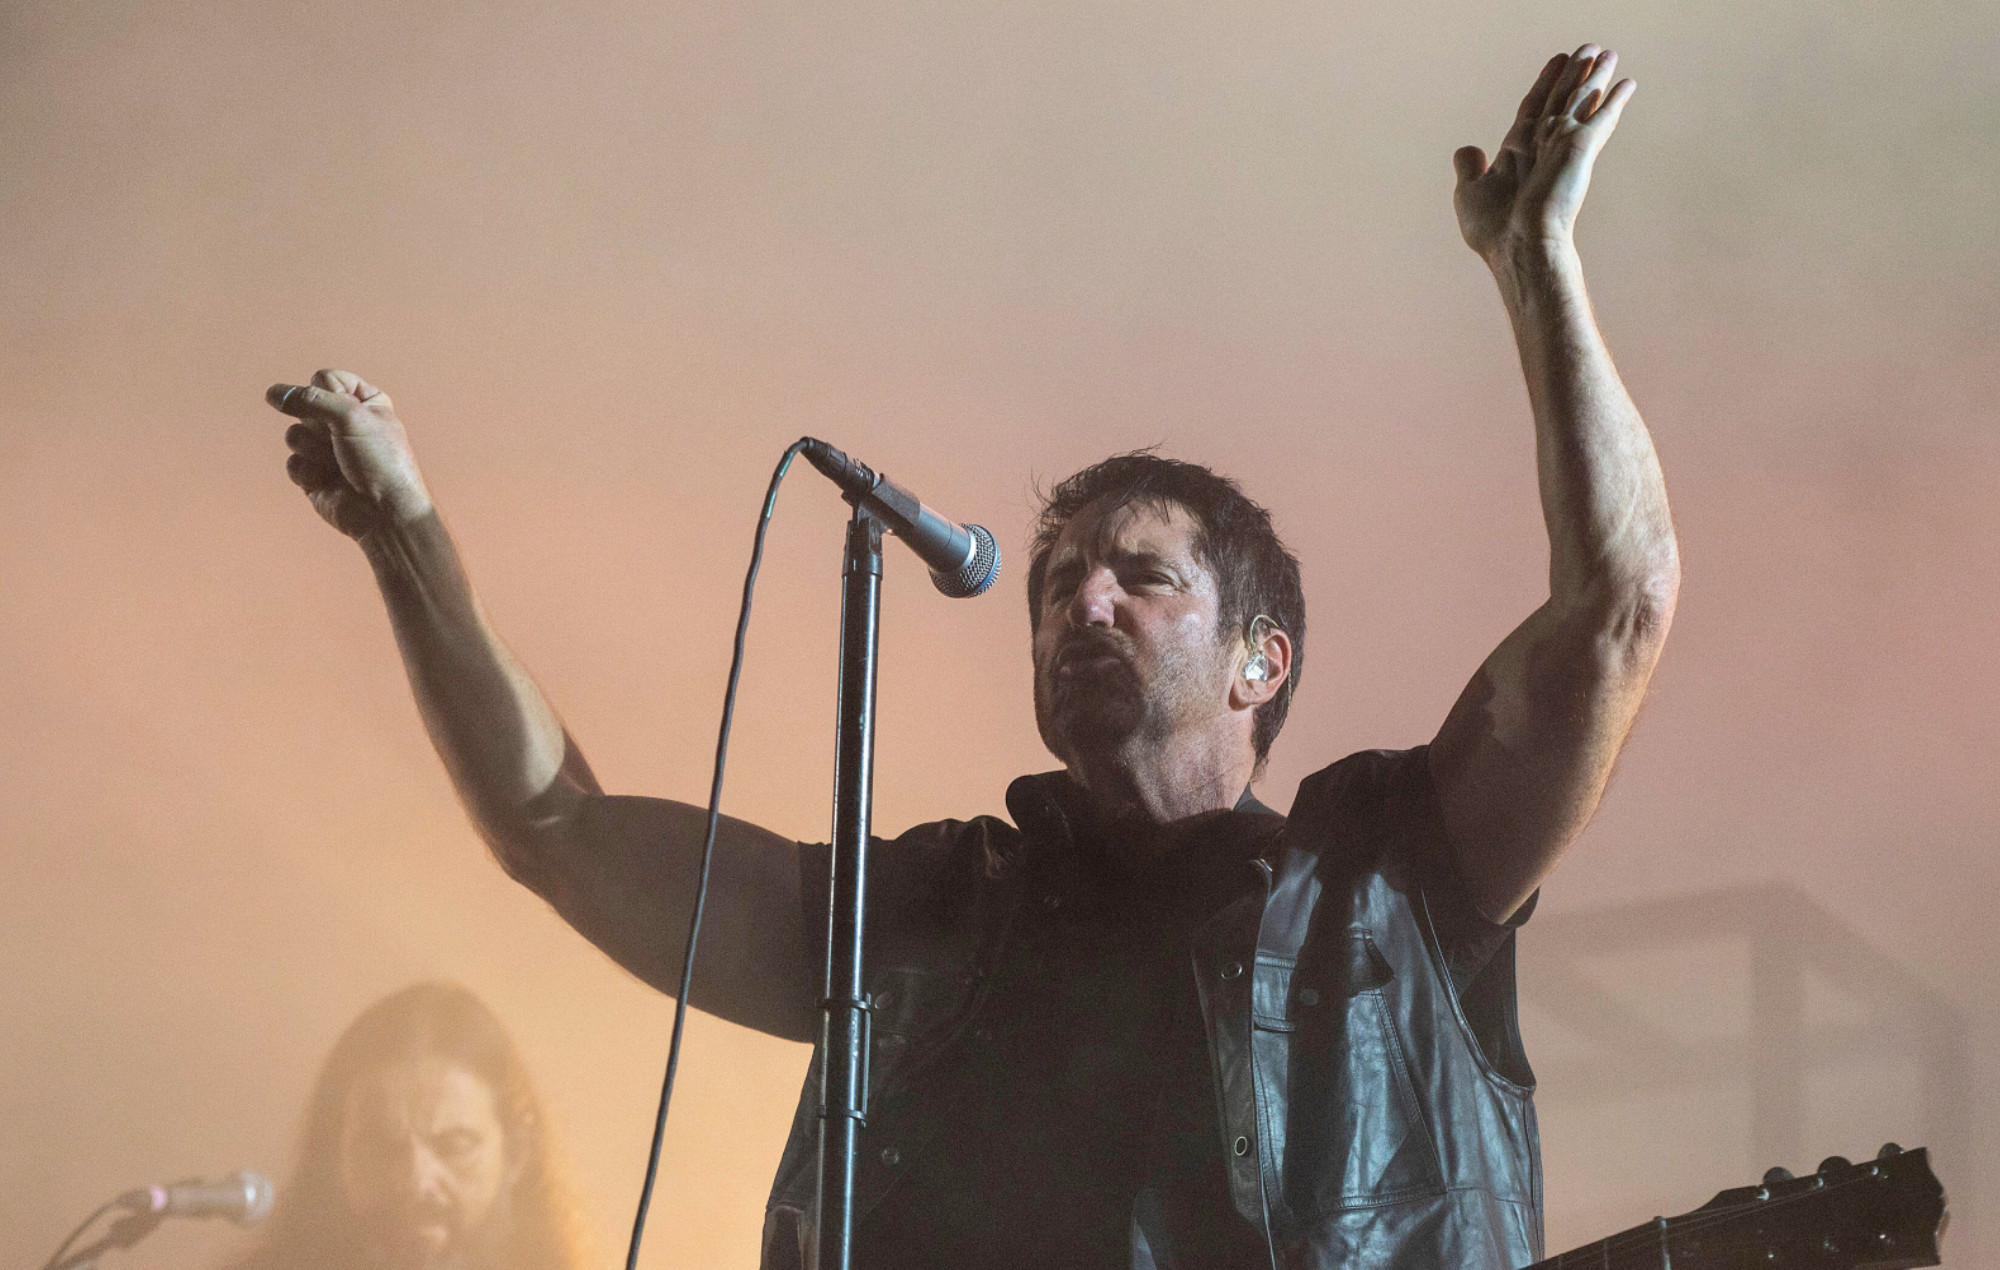 Nince Inch Nails, Trent Reznor